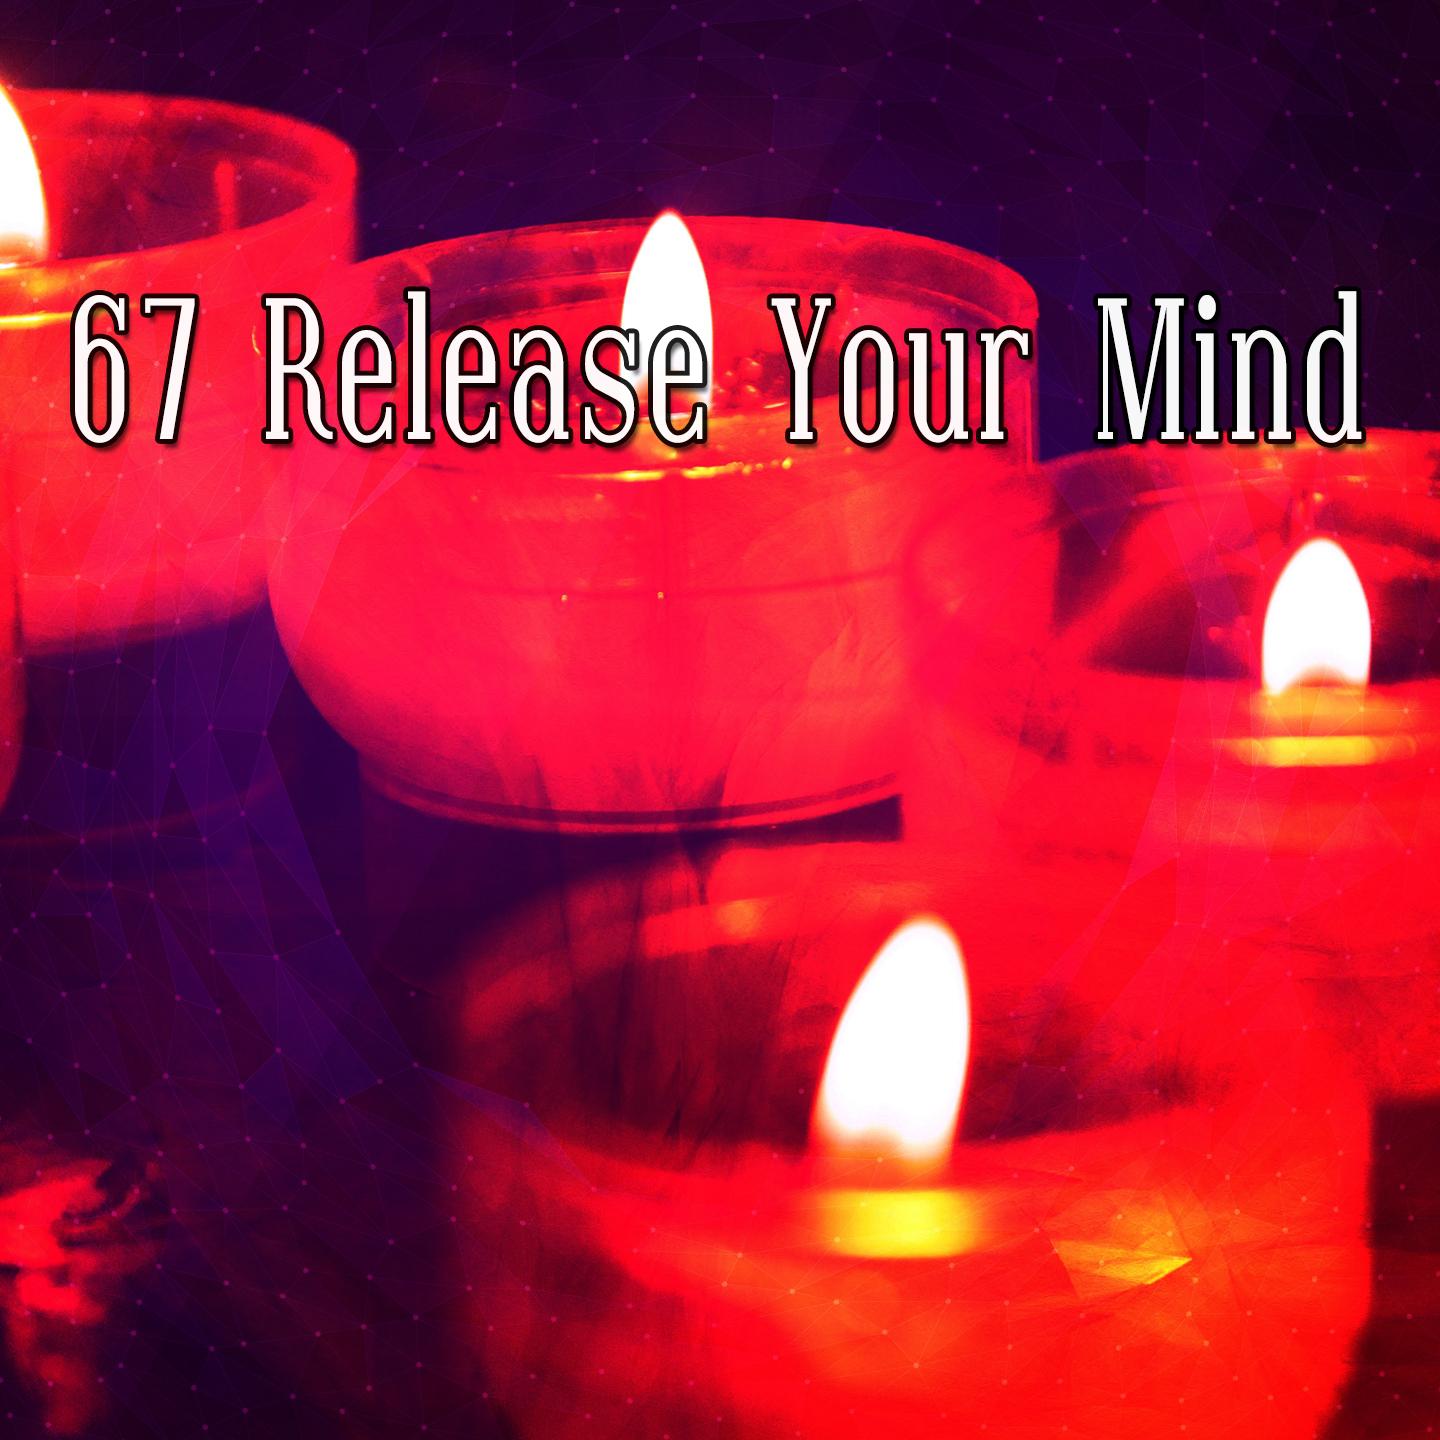 67 Release Your Mind